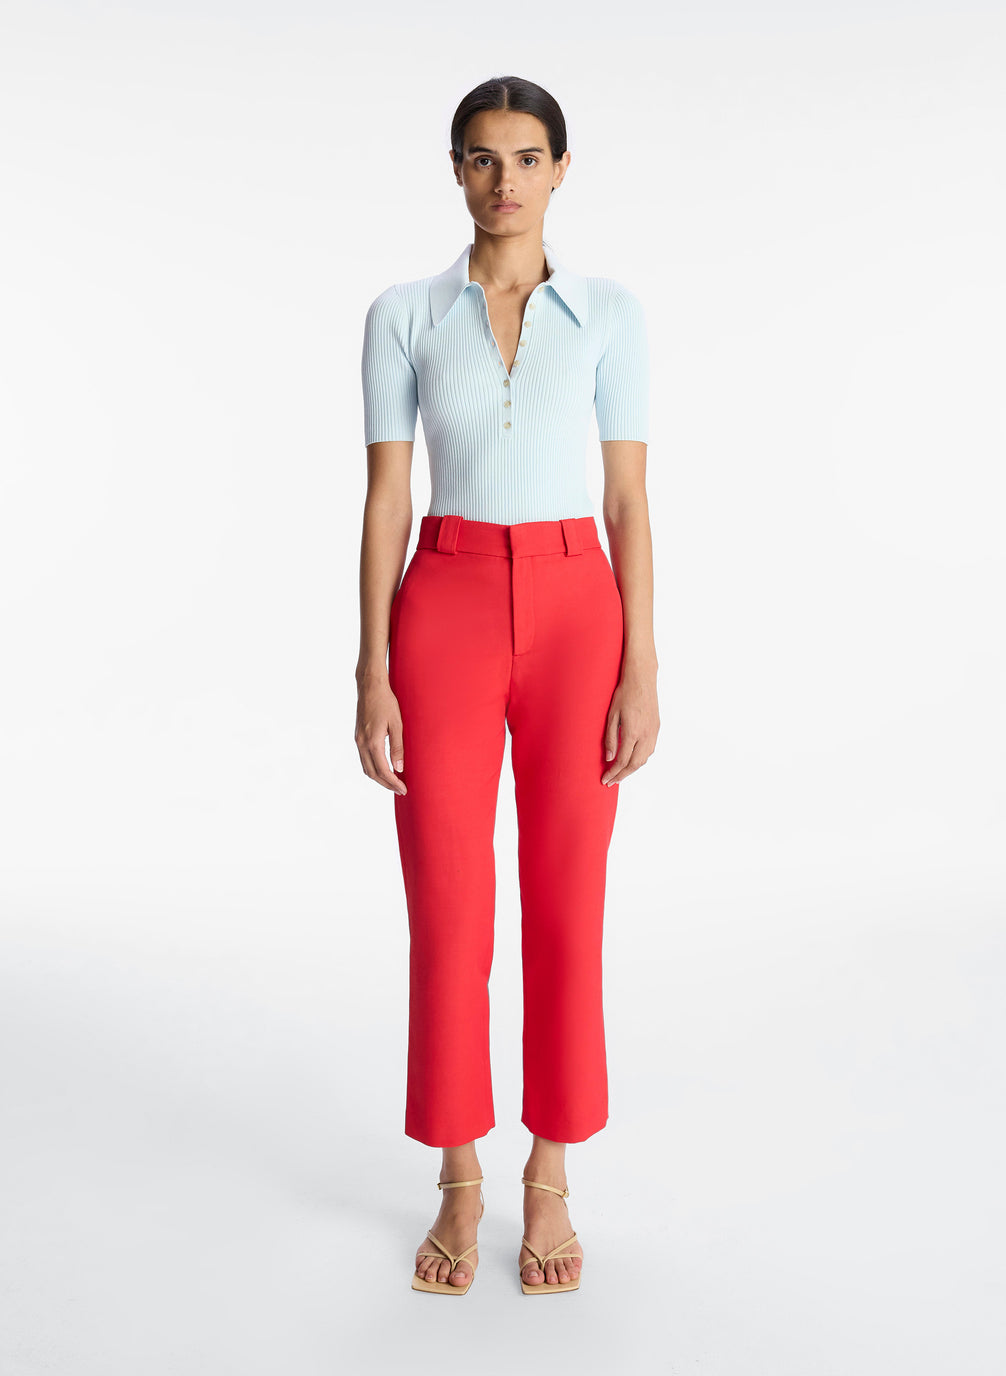 A.L.C. Foster Ankle Pant